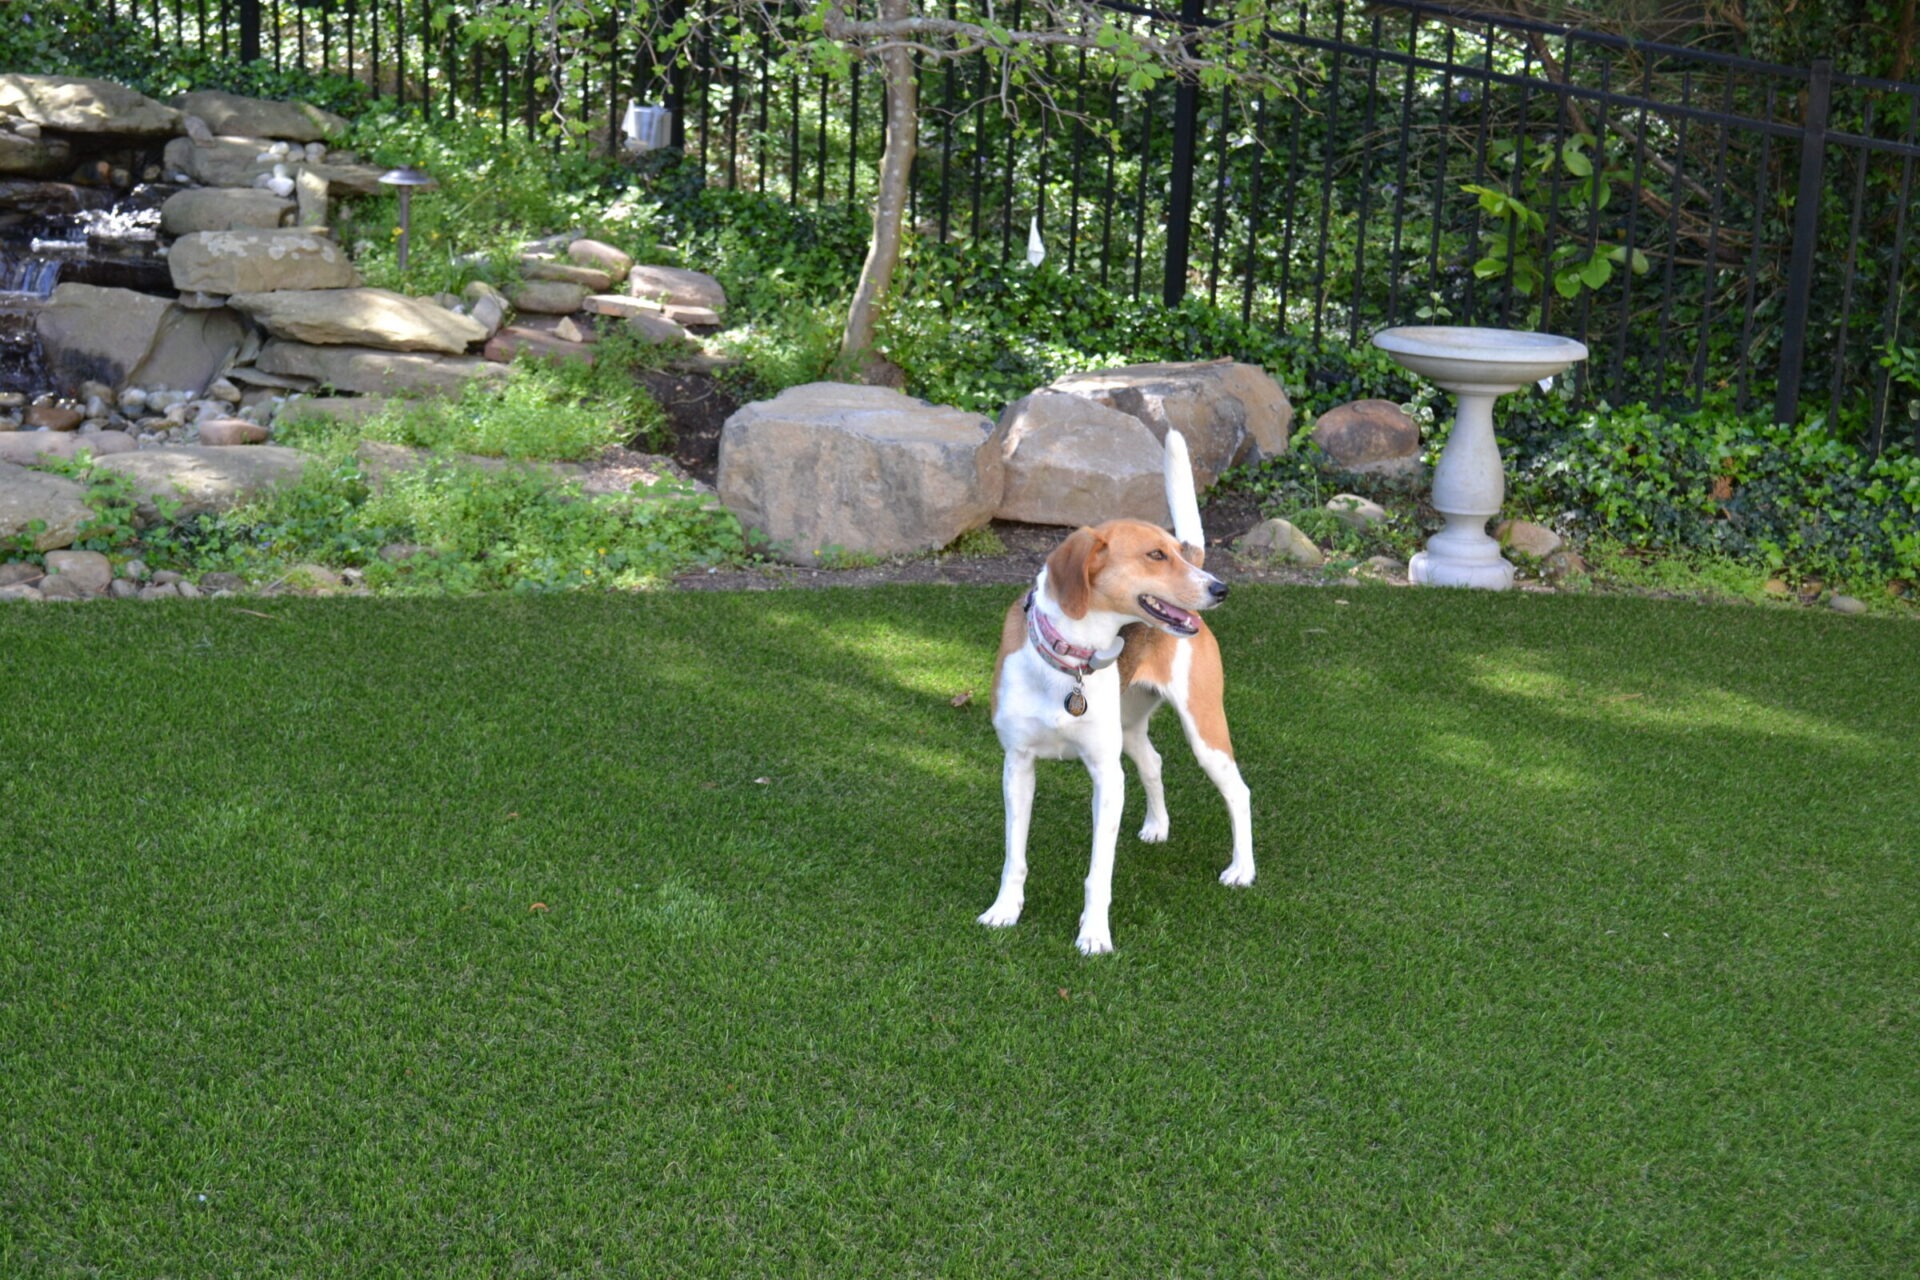 A brown and white dog stands on lush green grass with a stone water feature and metal fence in the background surrounded by plants.